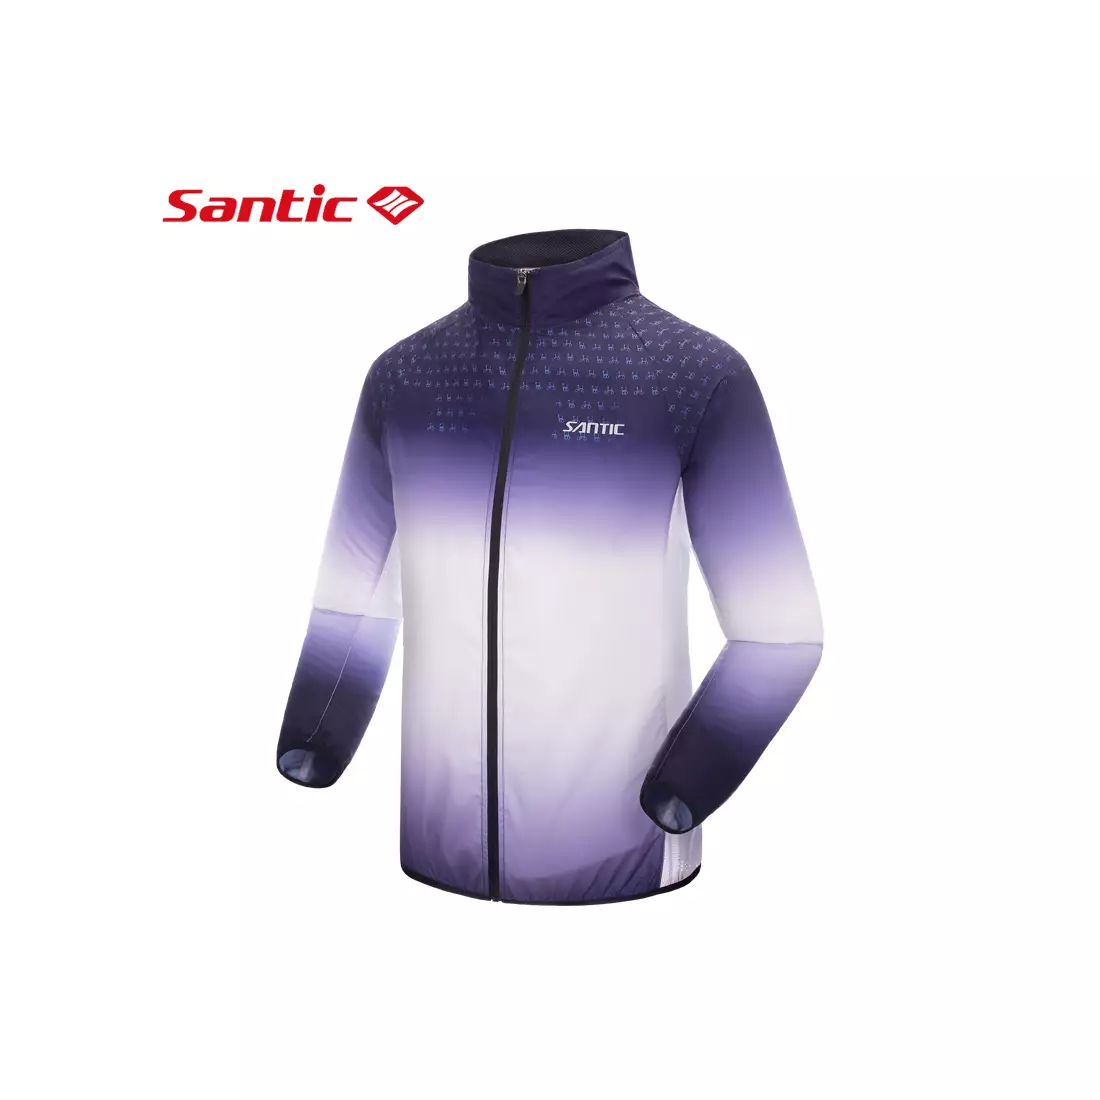 SANTIC light cycling jacket, white and purple